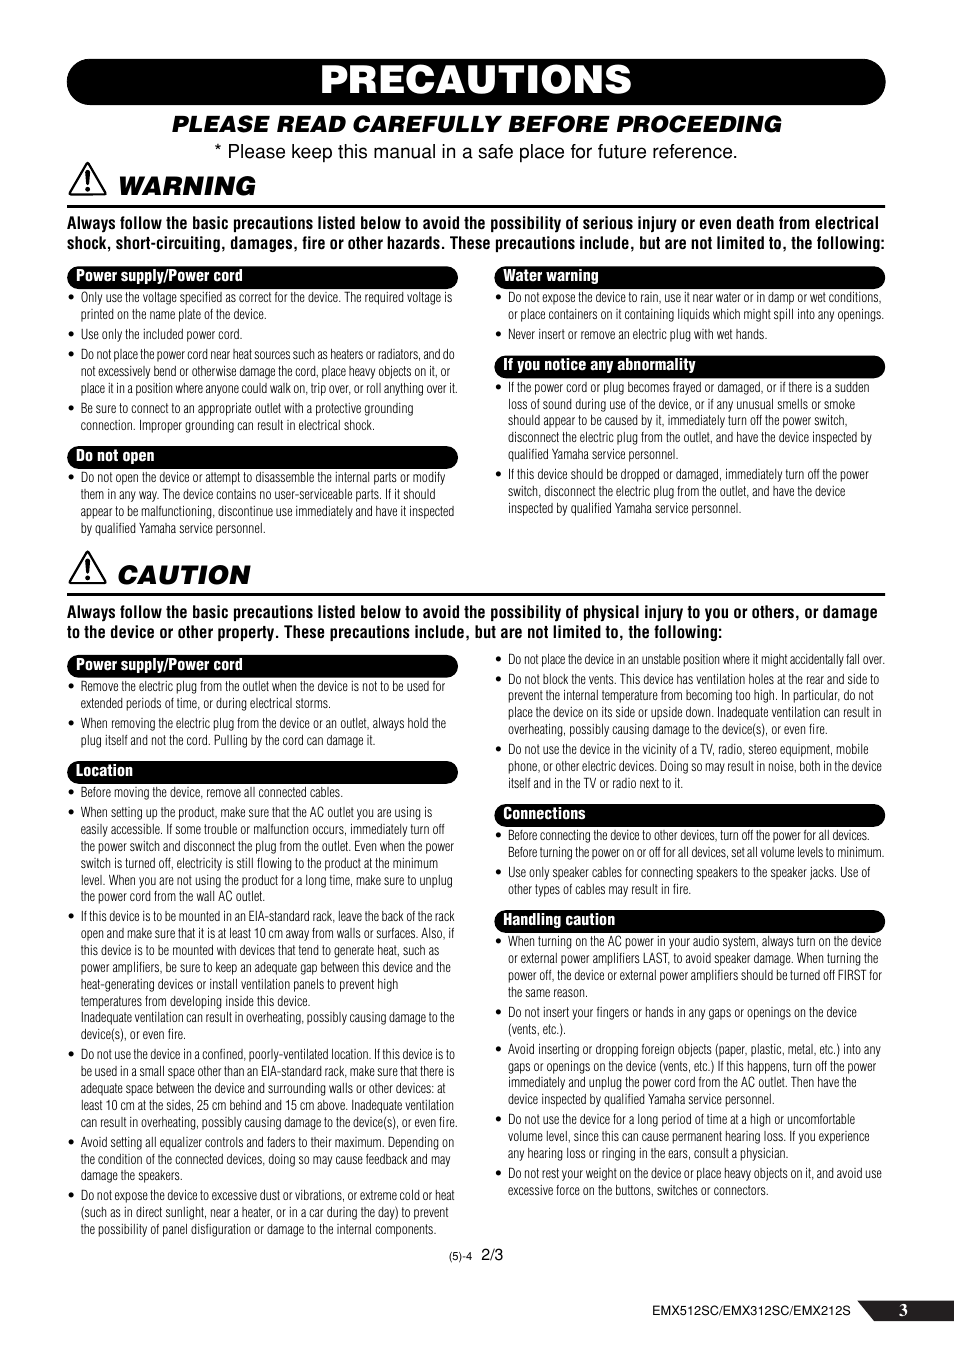 Precautions, Warning, Caution | Please read carefully before proceeding | Yamaha EMX212S User Manual | Page 3 / 36